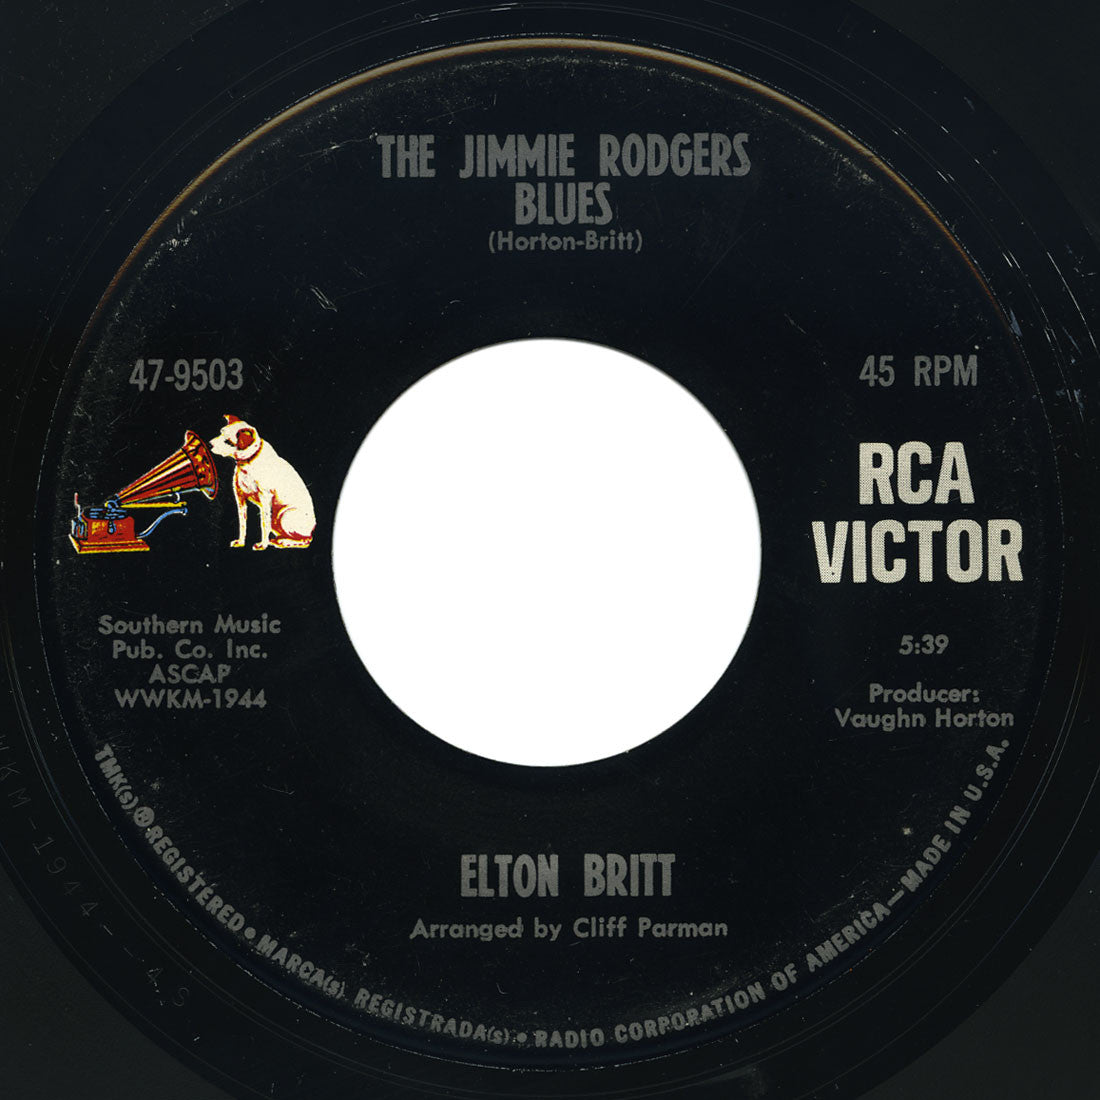 Elton Britt – The Jimmie Rodgers Blues / Singin’ In The Pines – RCA